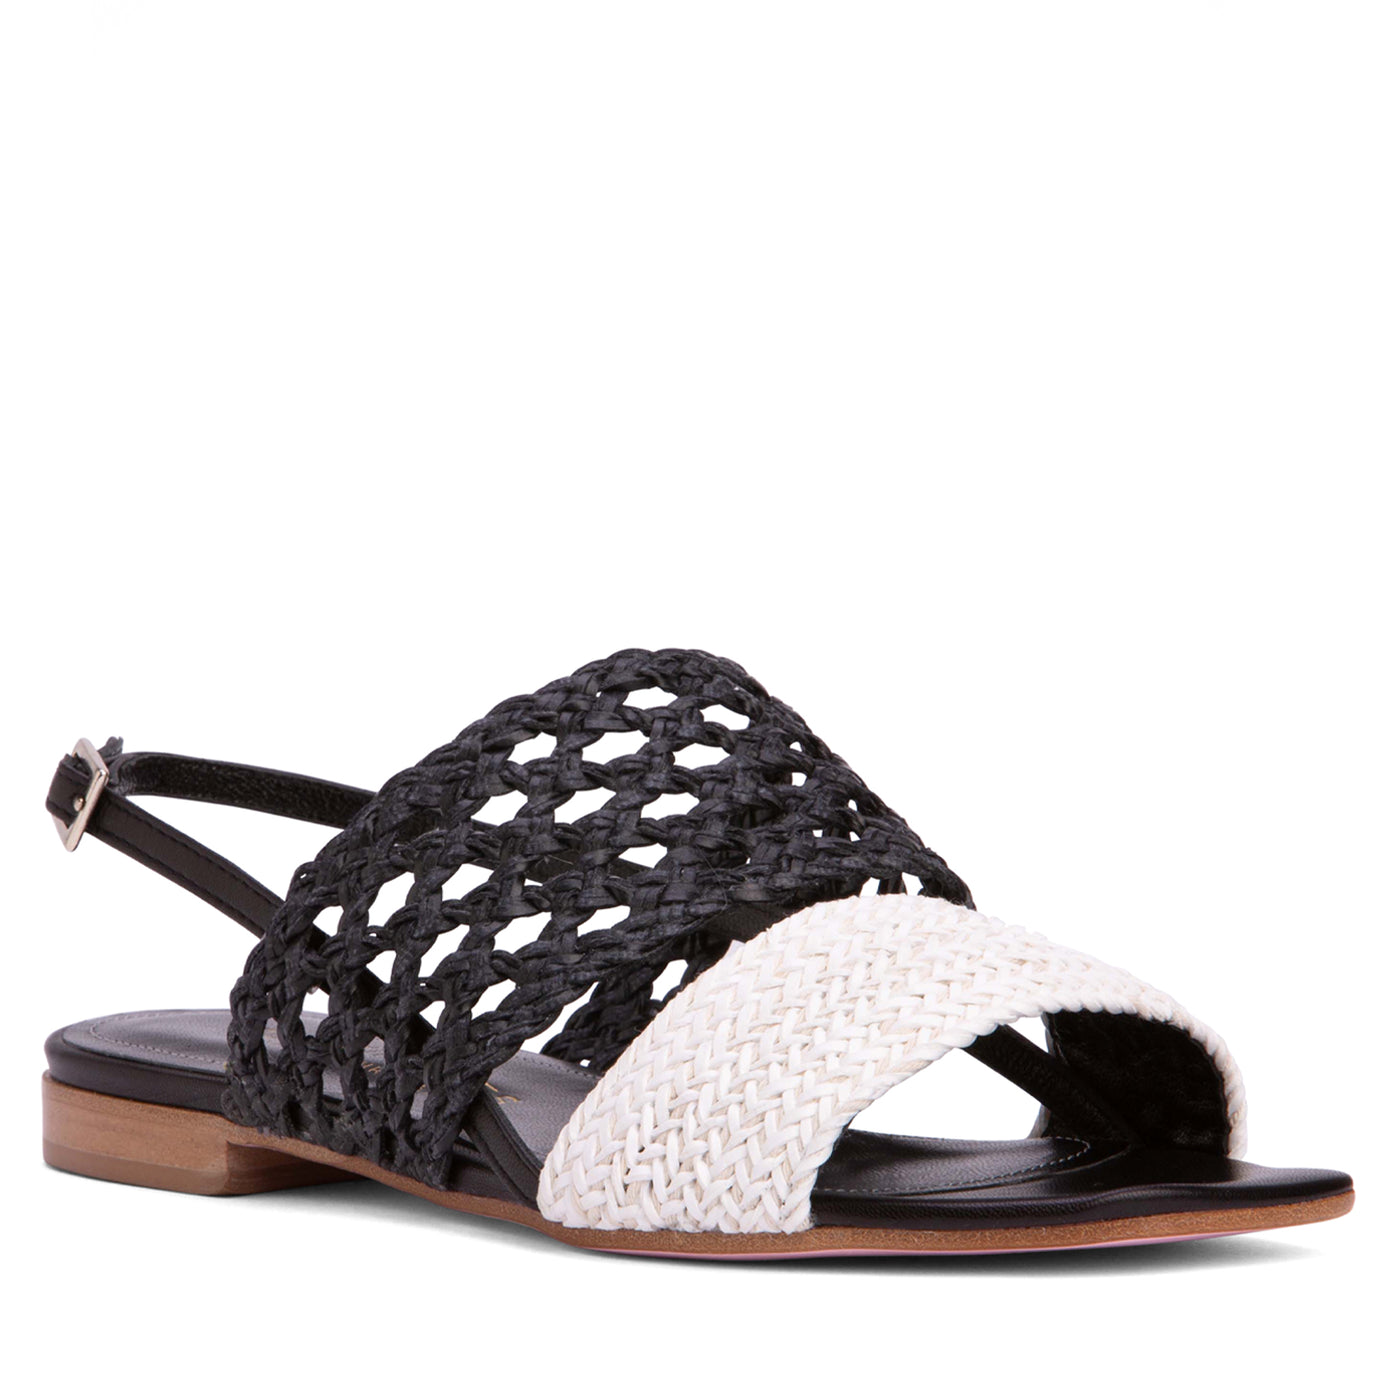 Comfortable Flat Sandal - Black And White Leather